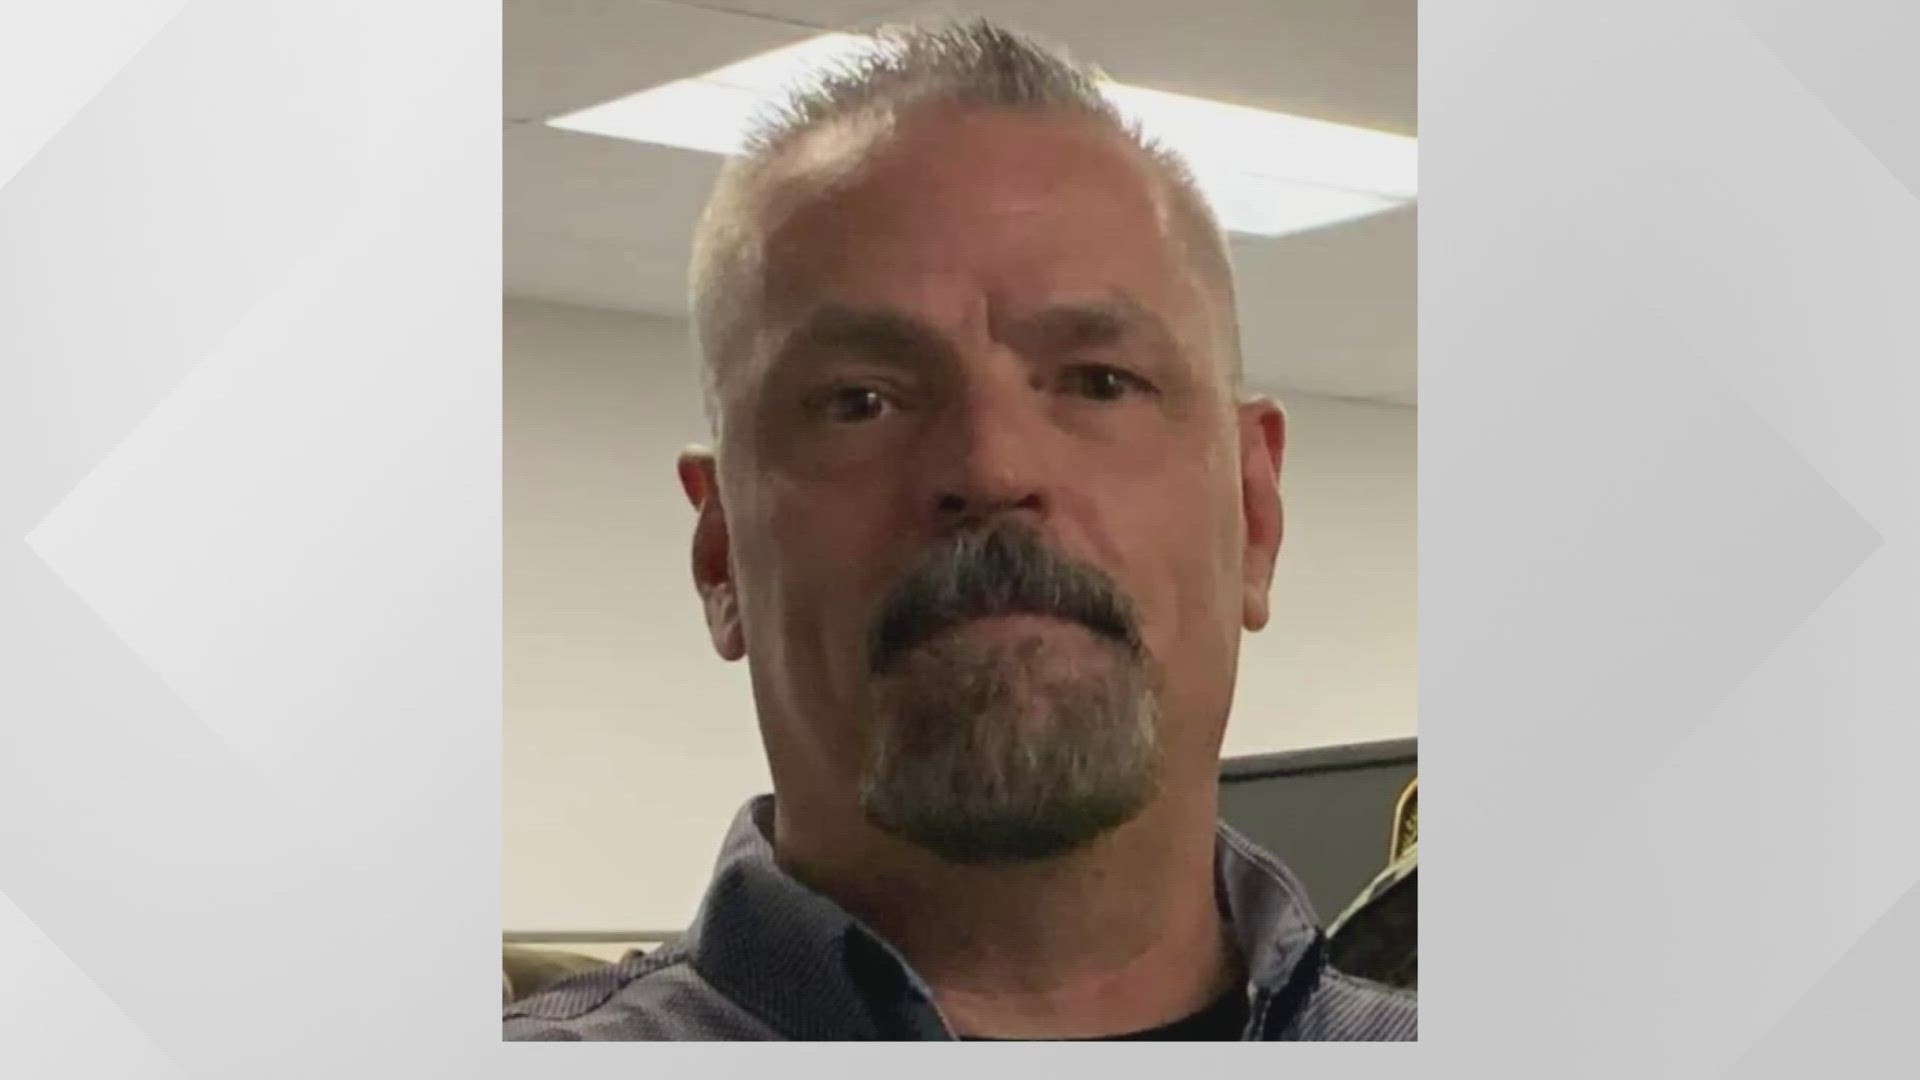 The National Park Service says 56-year-old Kevin Sypher of Parker, was last seen Sunday afternoon in the Sandbeach lake parking area.